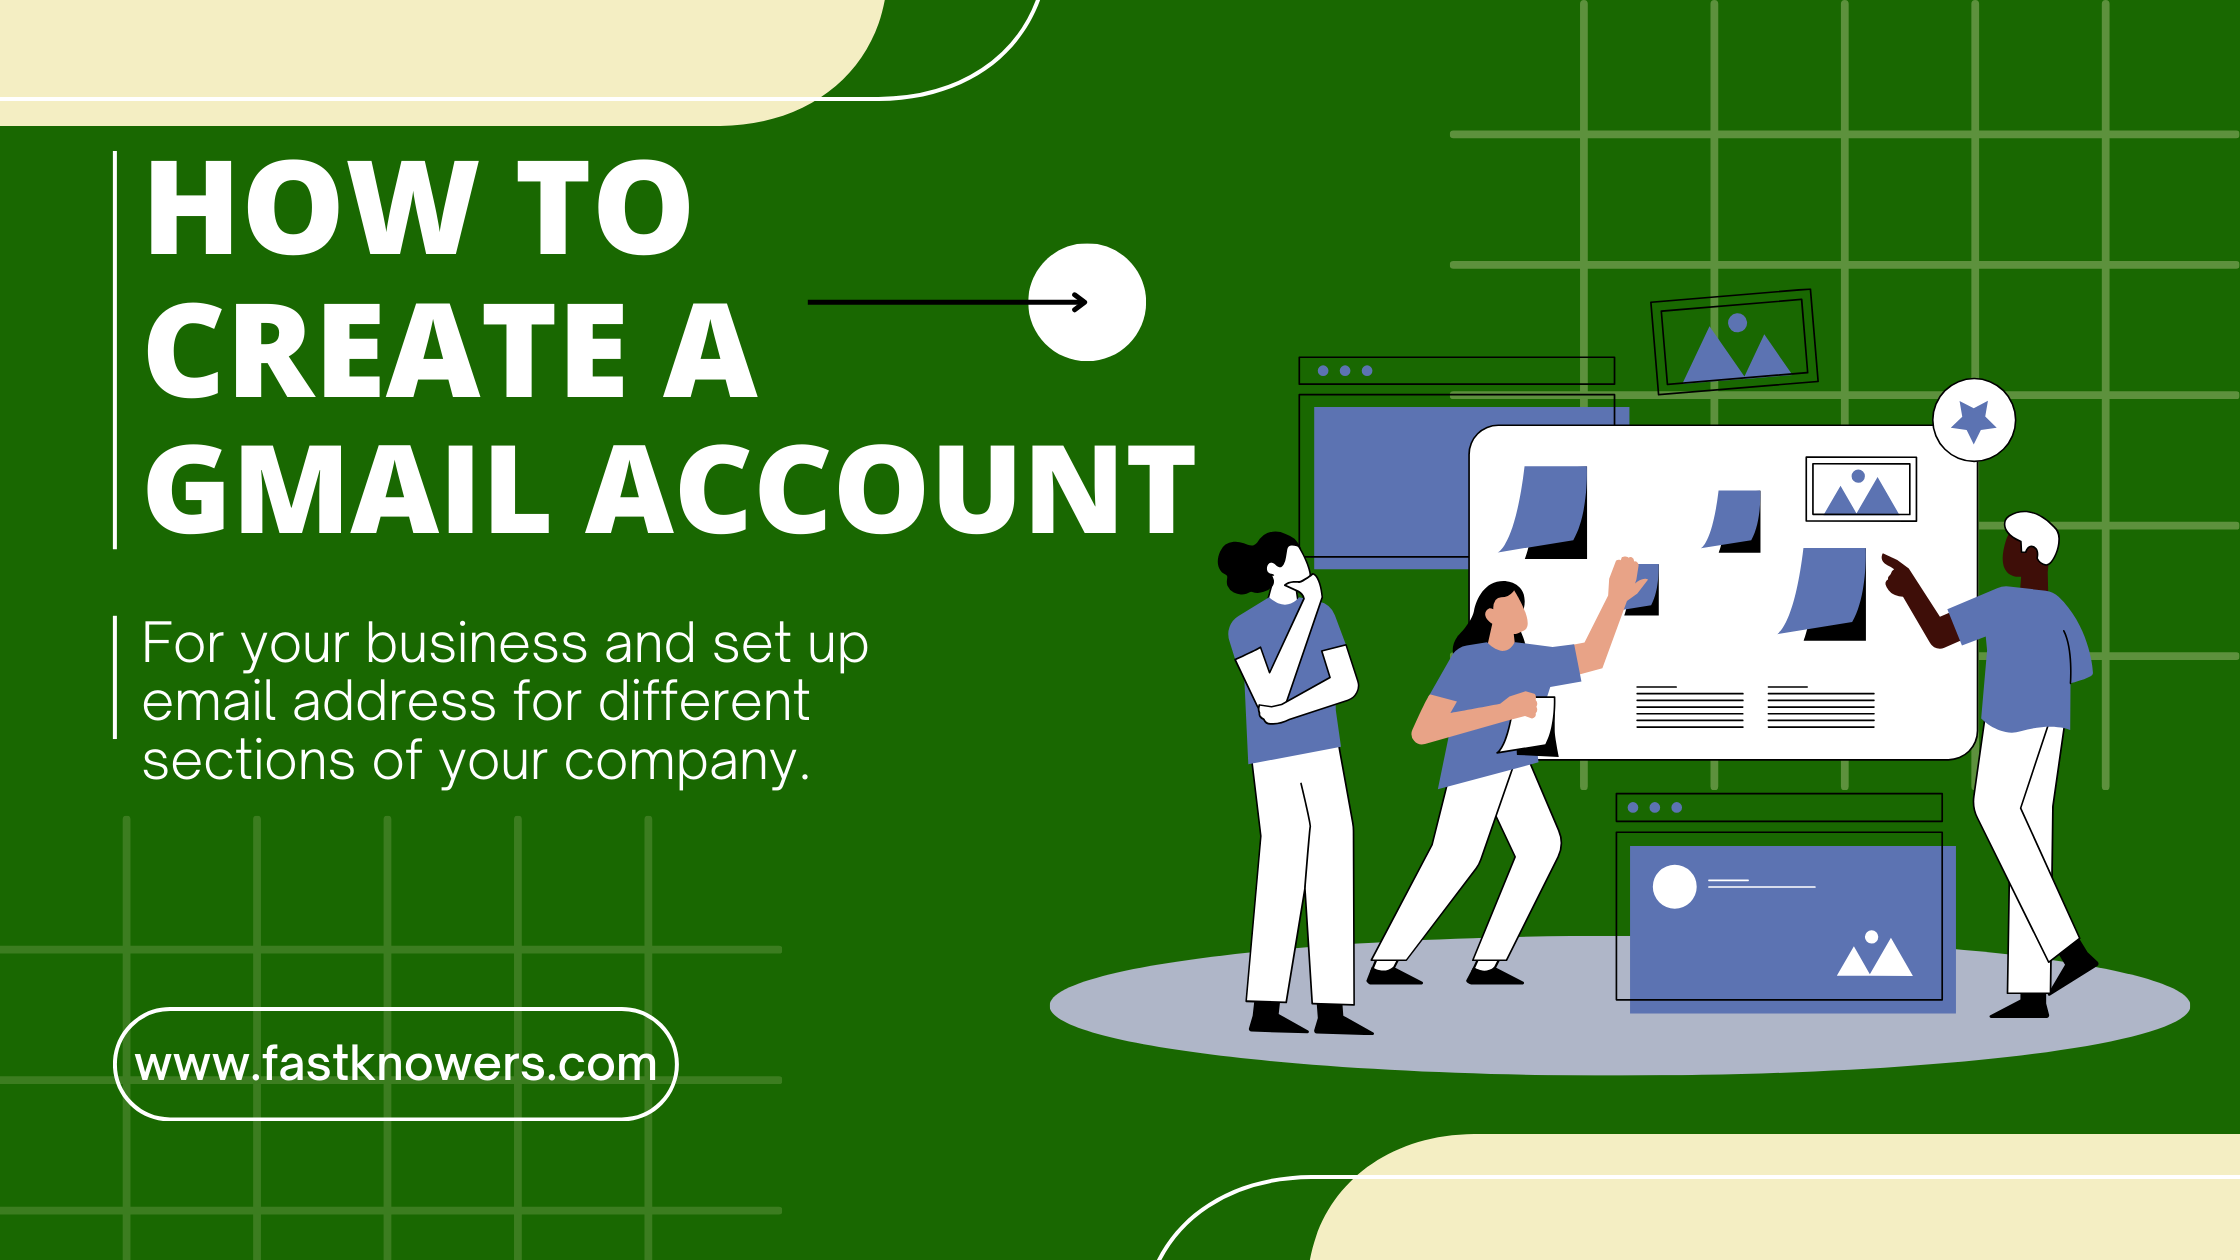 How to create a Gmail account for your business